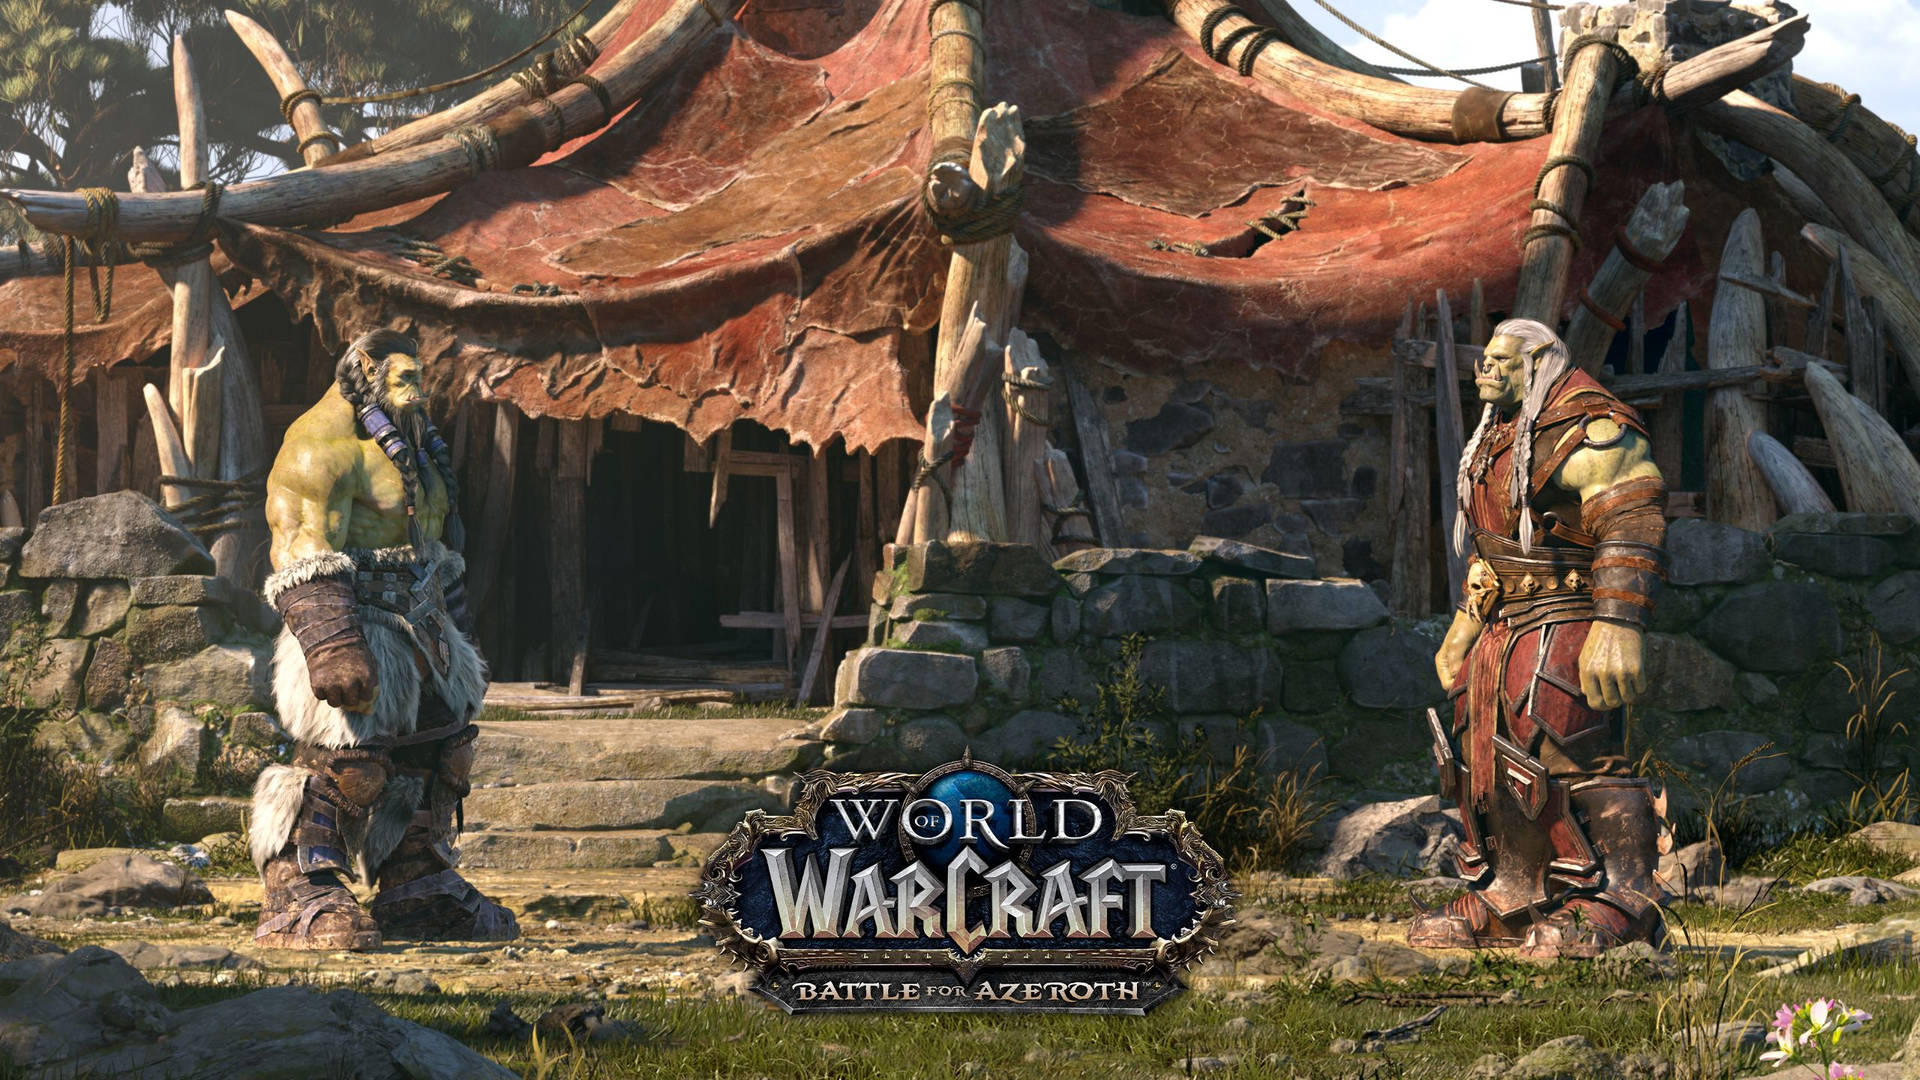 Two Legendary Leaders Join Forces in World of Warcraft: Battle for Azeroth Wallpaper